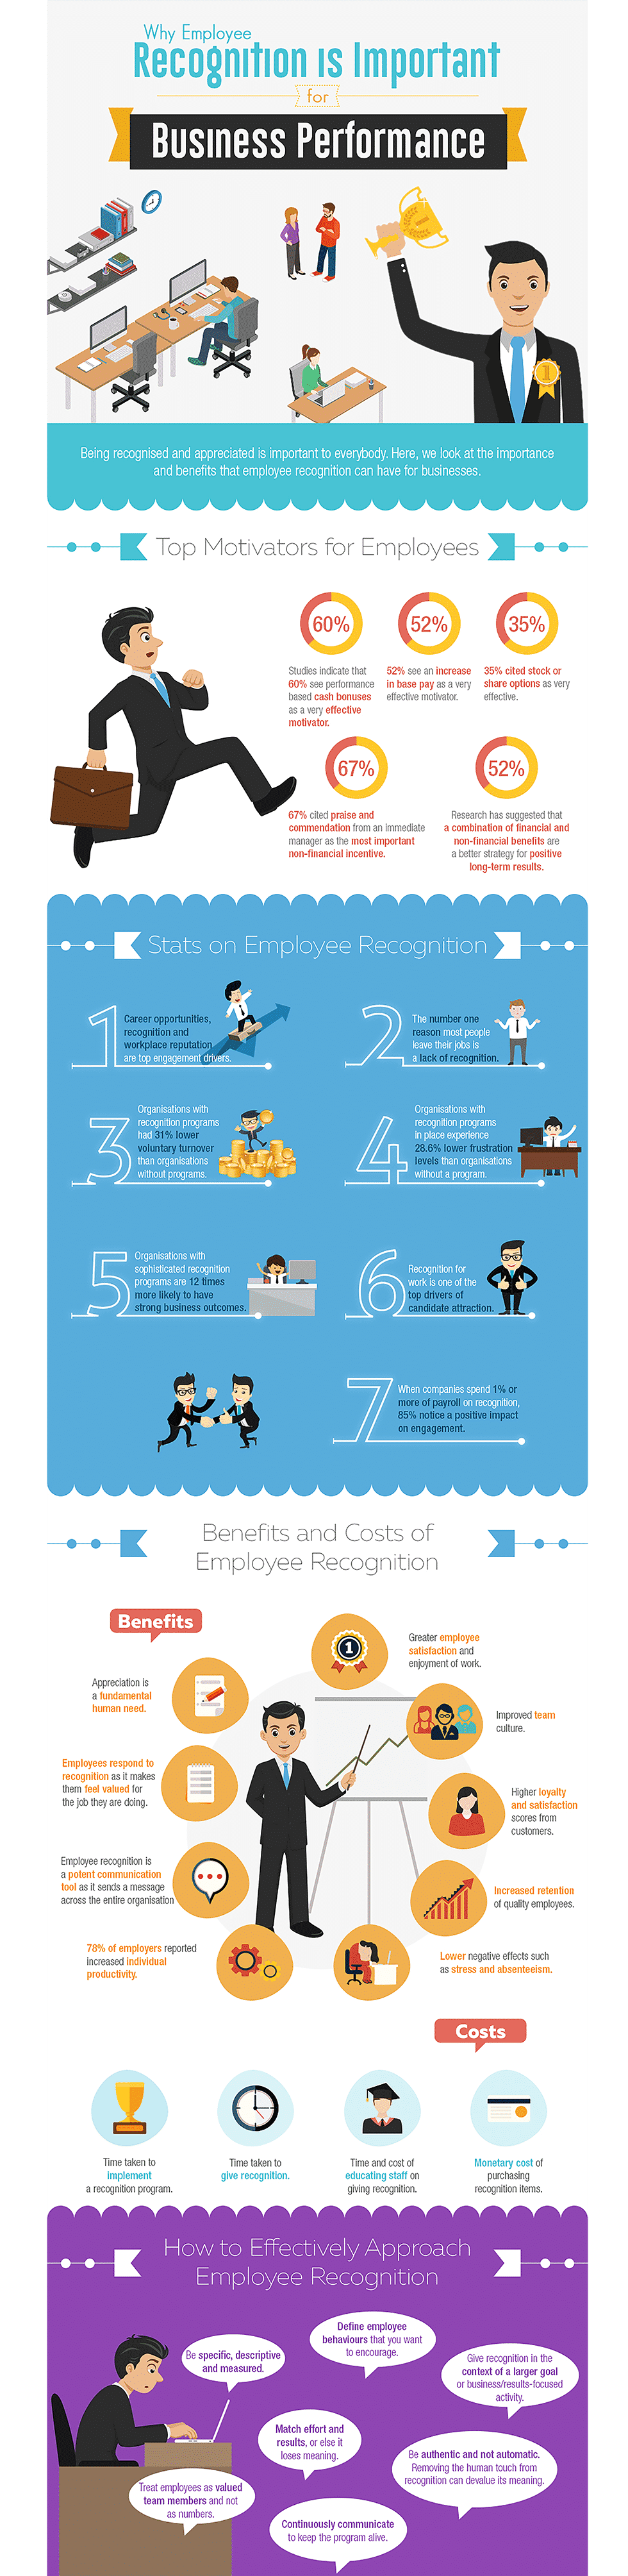 Business Performance Infographic, CBR, PEO